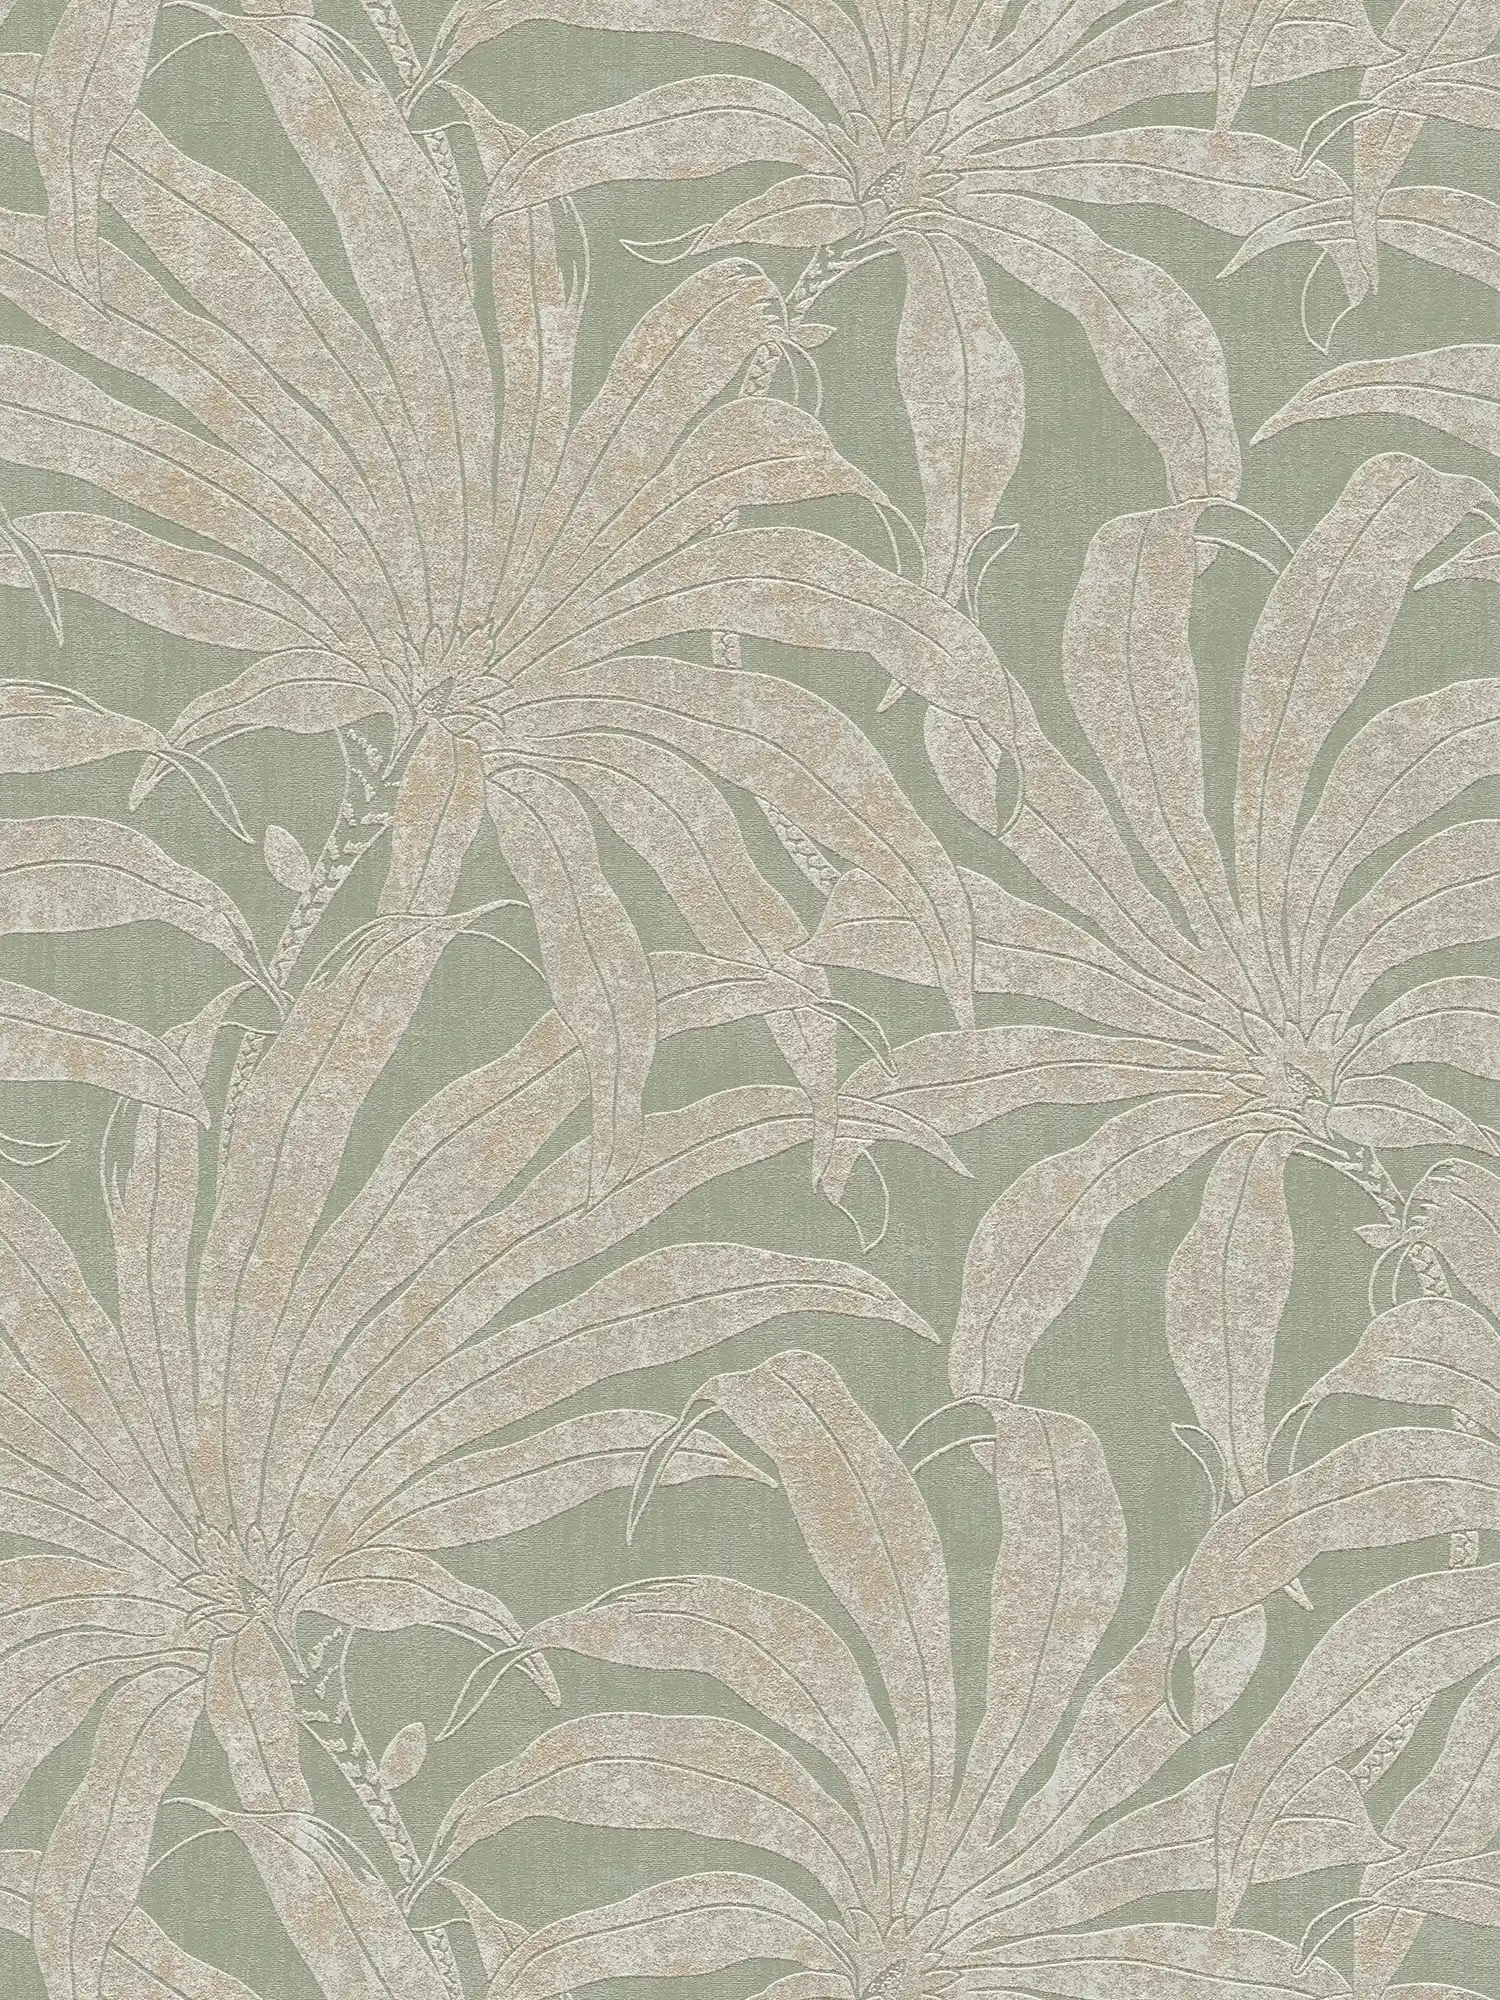 Floral detailed pattern wallpaper with jungle blossom - green, gold, silver
